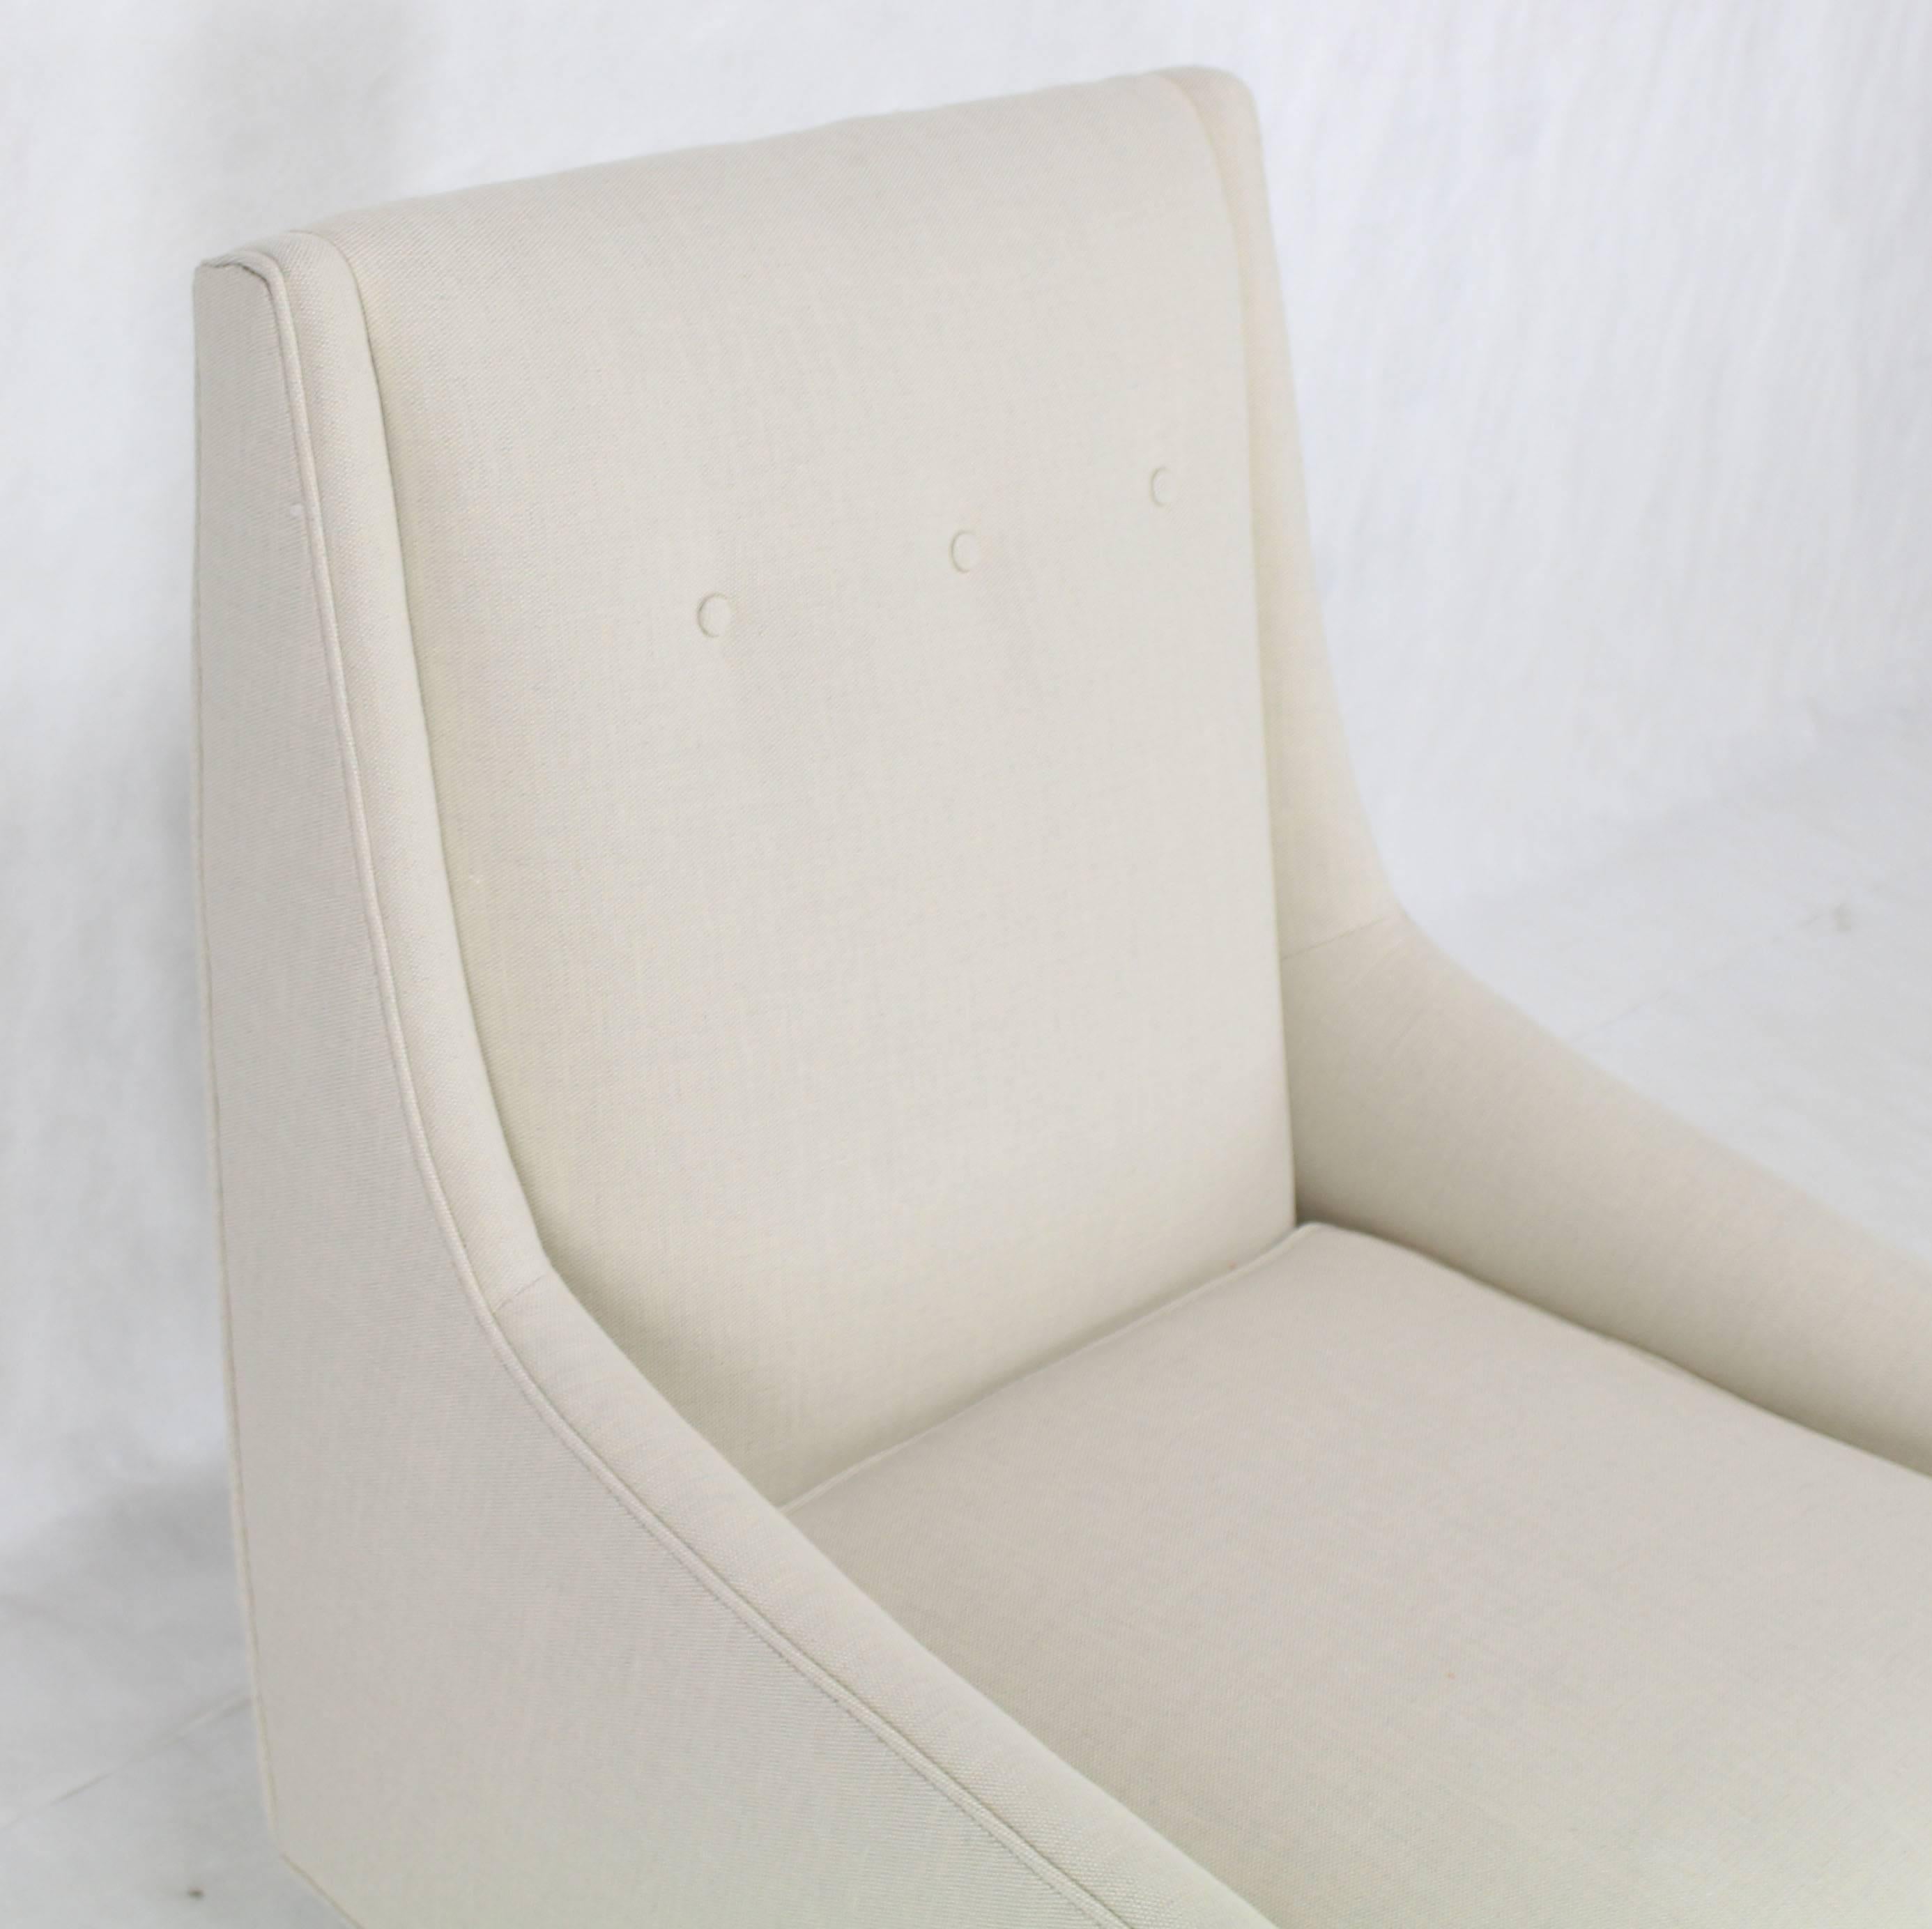 New Upholstery Mid-Century Modern Lounge Chair In Excellent Condition For Sale In Rockaway, NJ